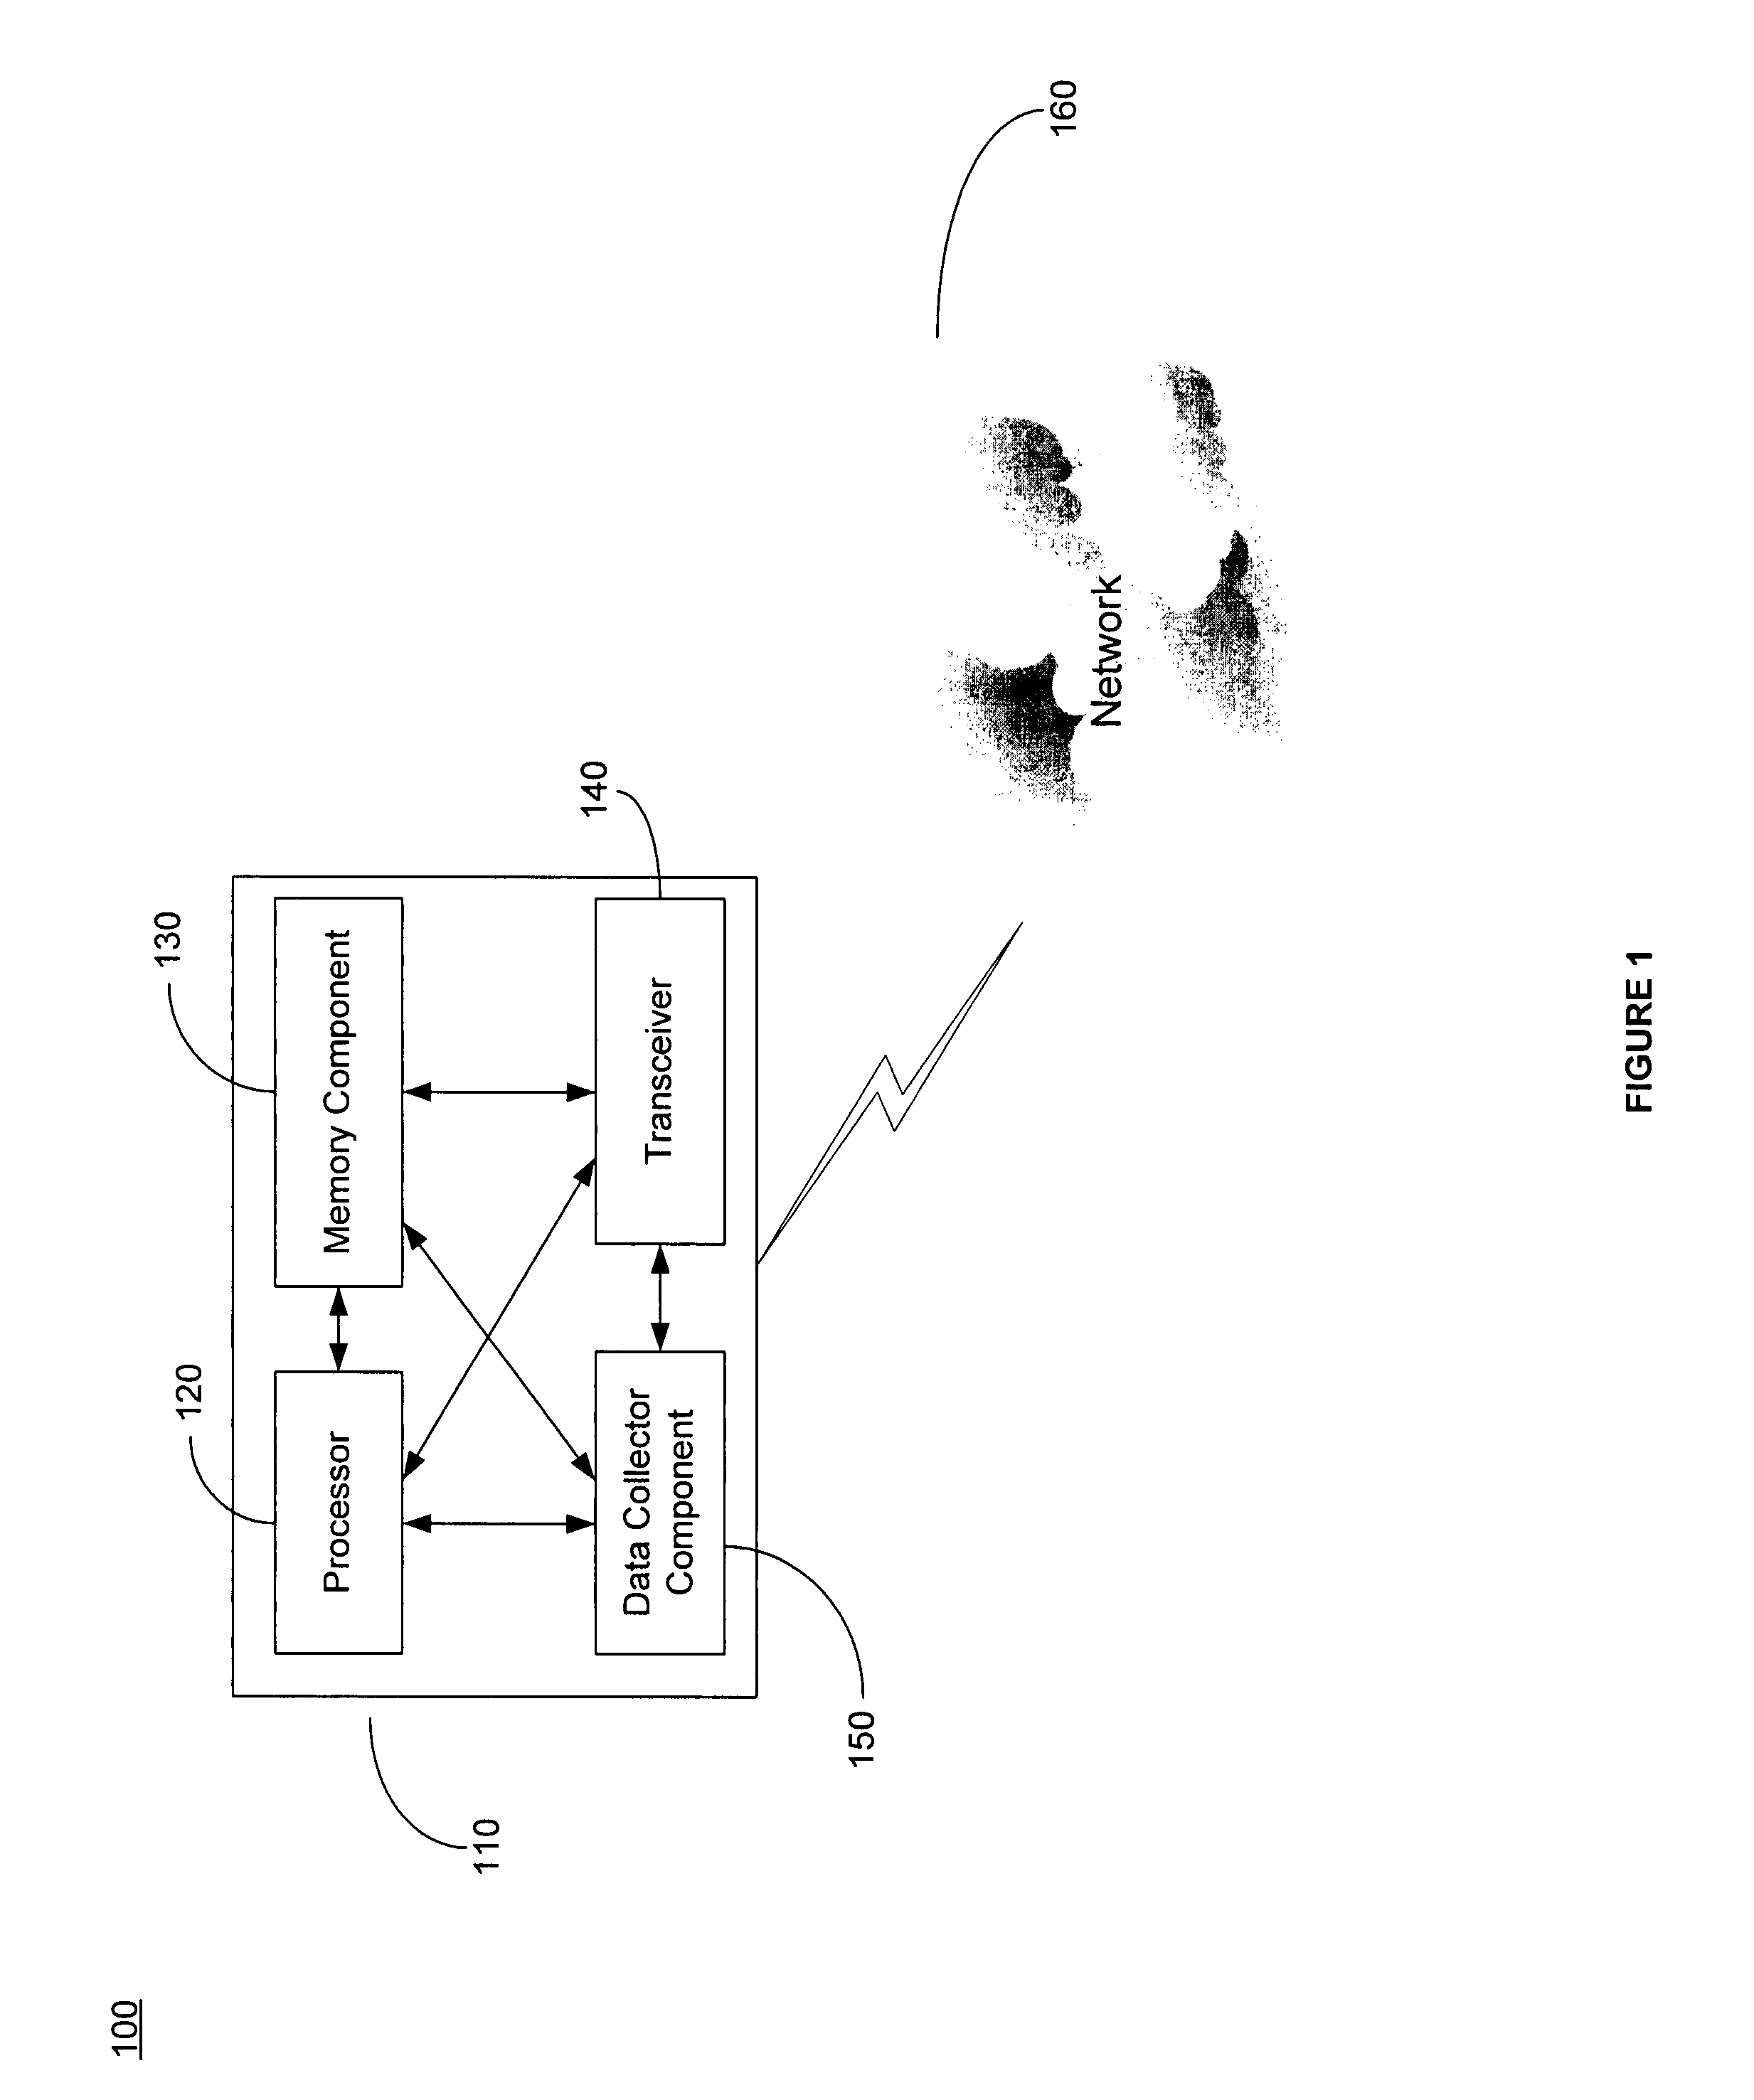 Method and system for collecting wireless information transparently and non-intrusively